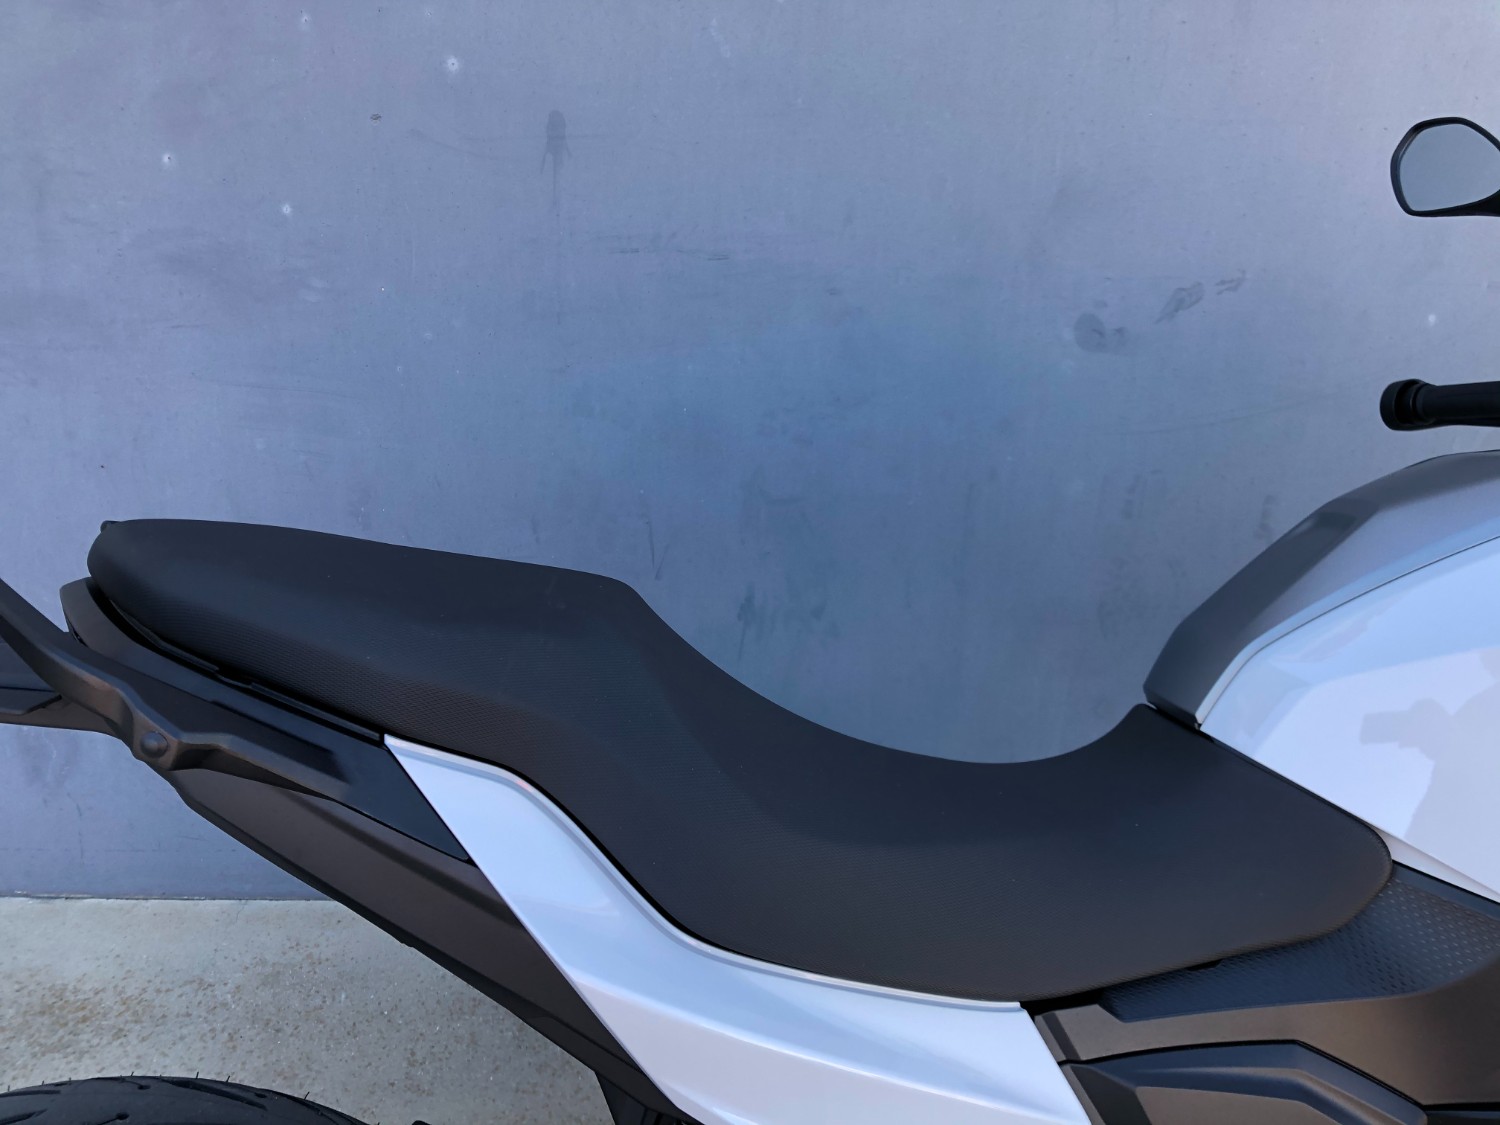 2020 BMW F900 XR Motorcycle Image 18